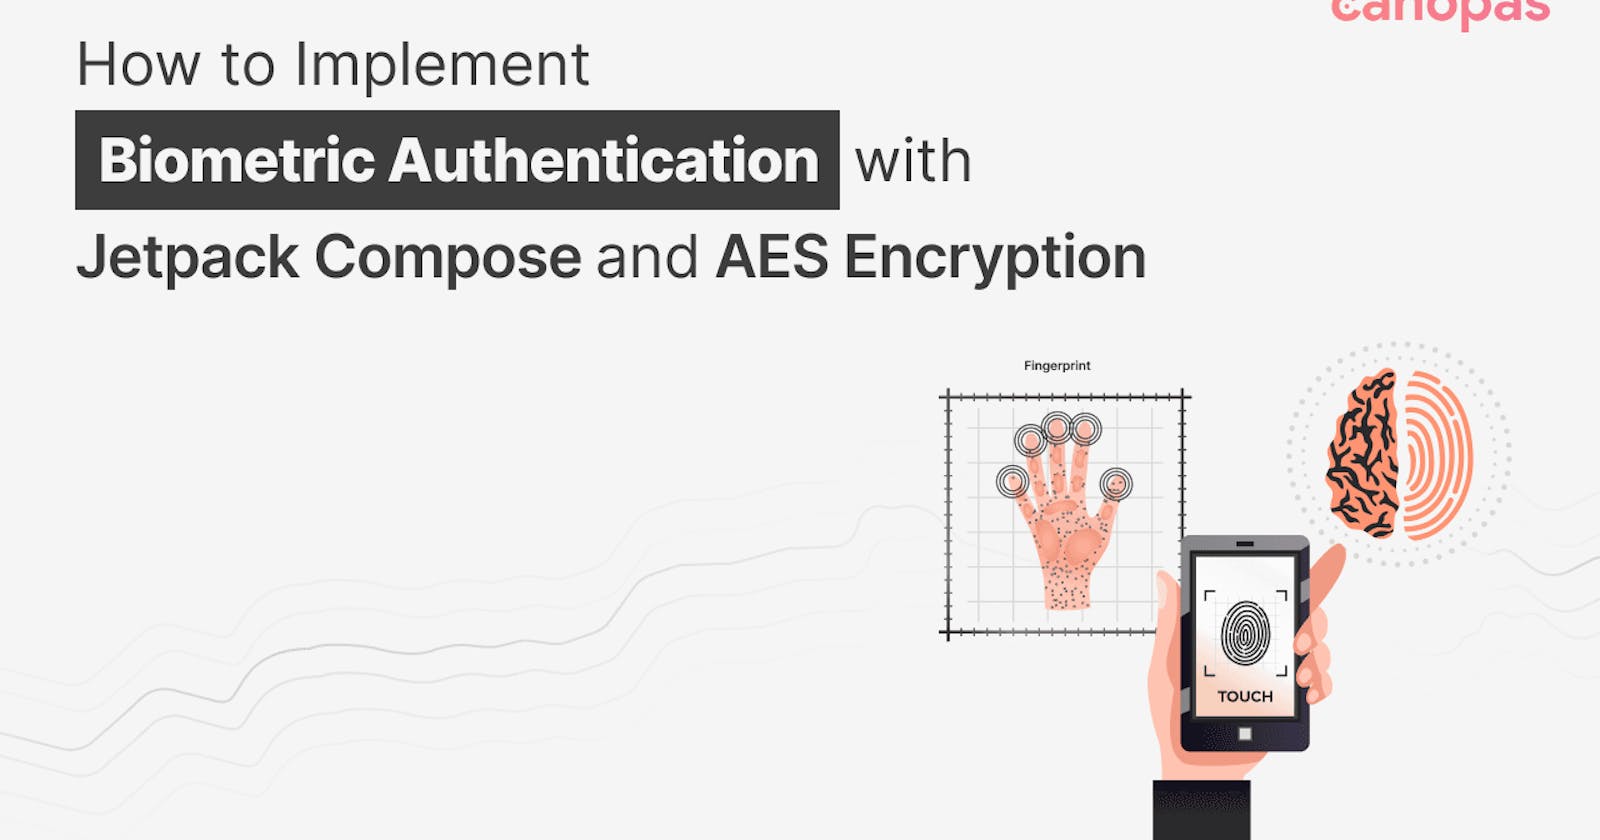 How to Implement Biometric Authentication with Jetpack Compose and AES Encryption